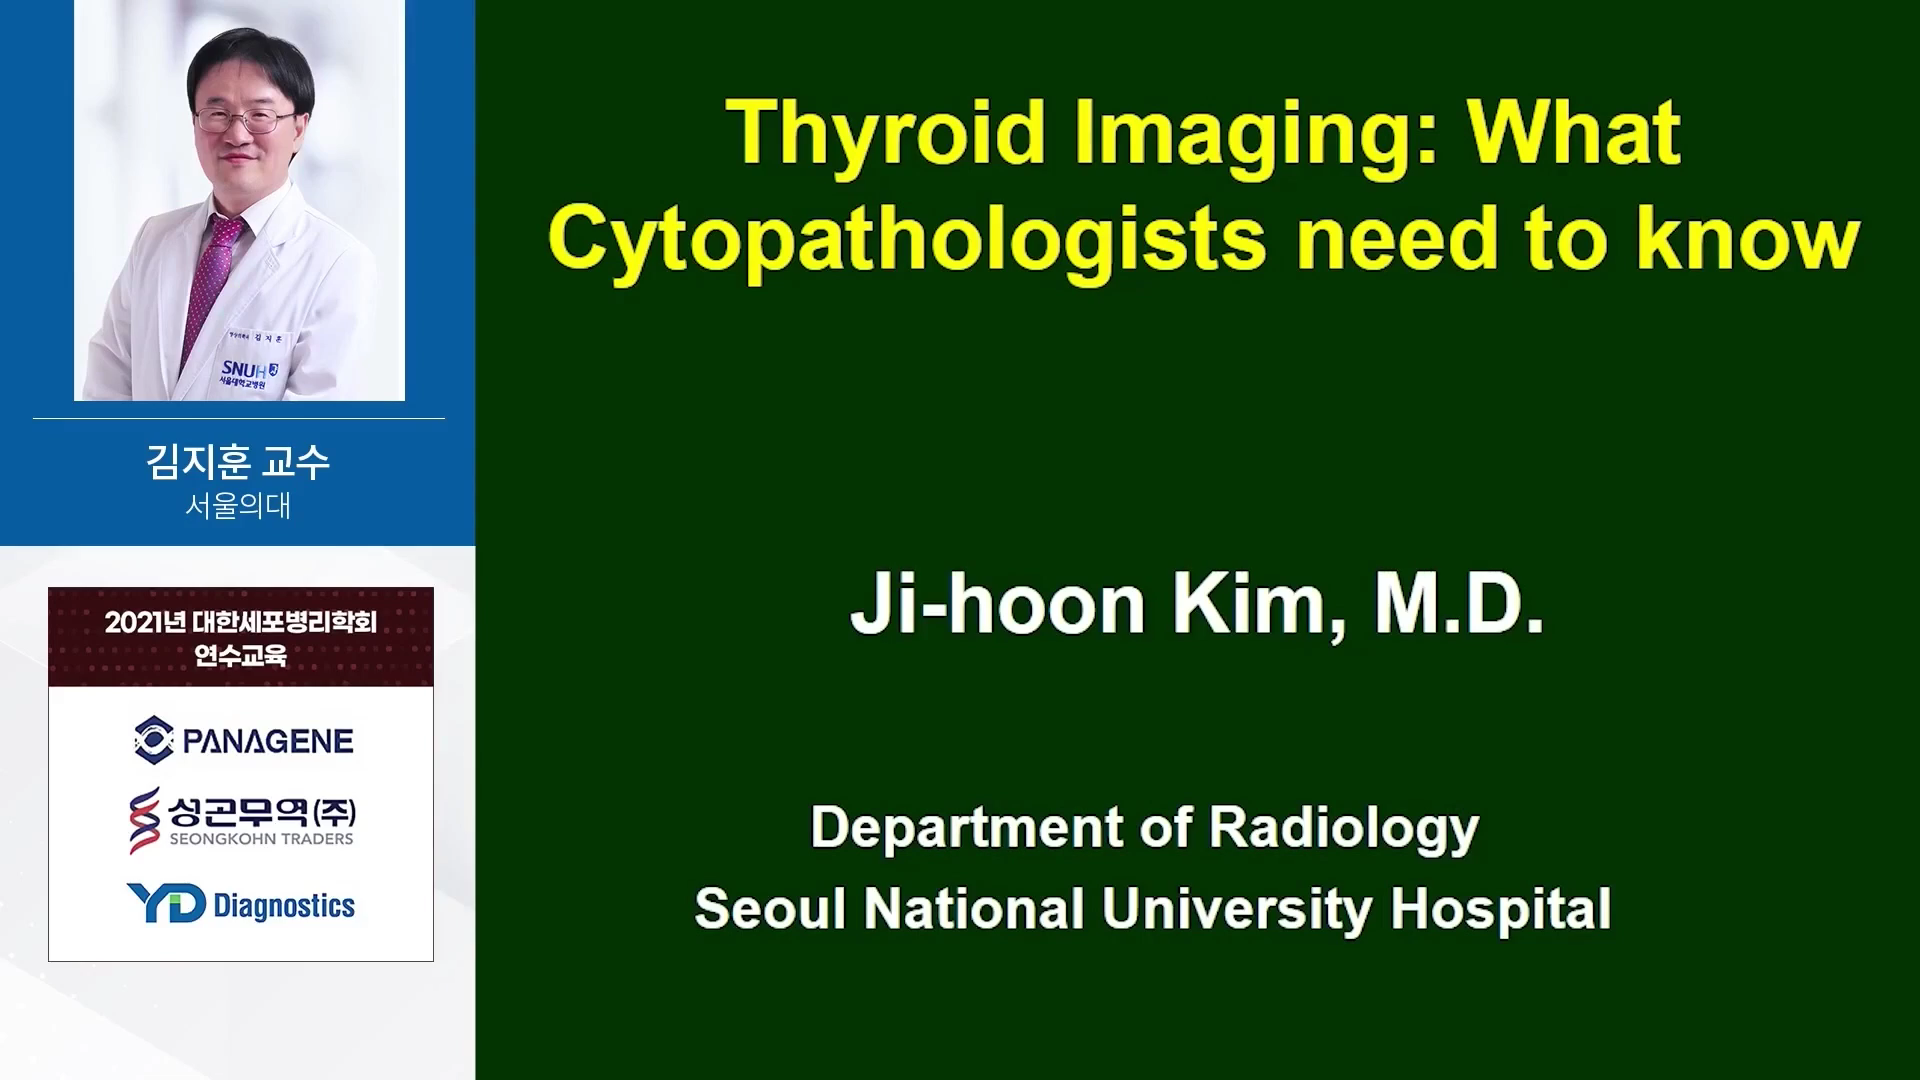 Thyroid imaging: what cytopathologists need to know